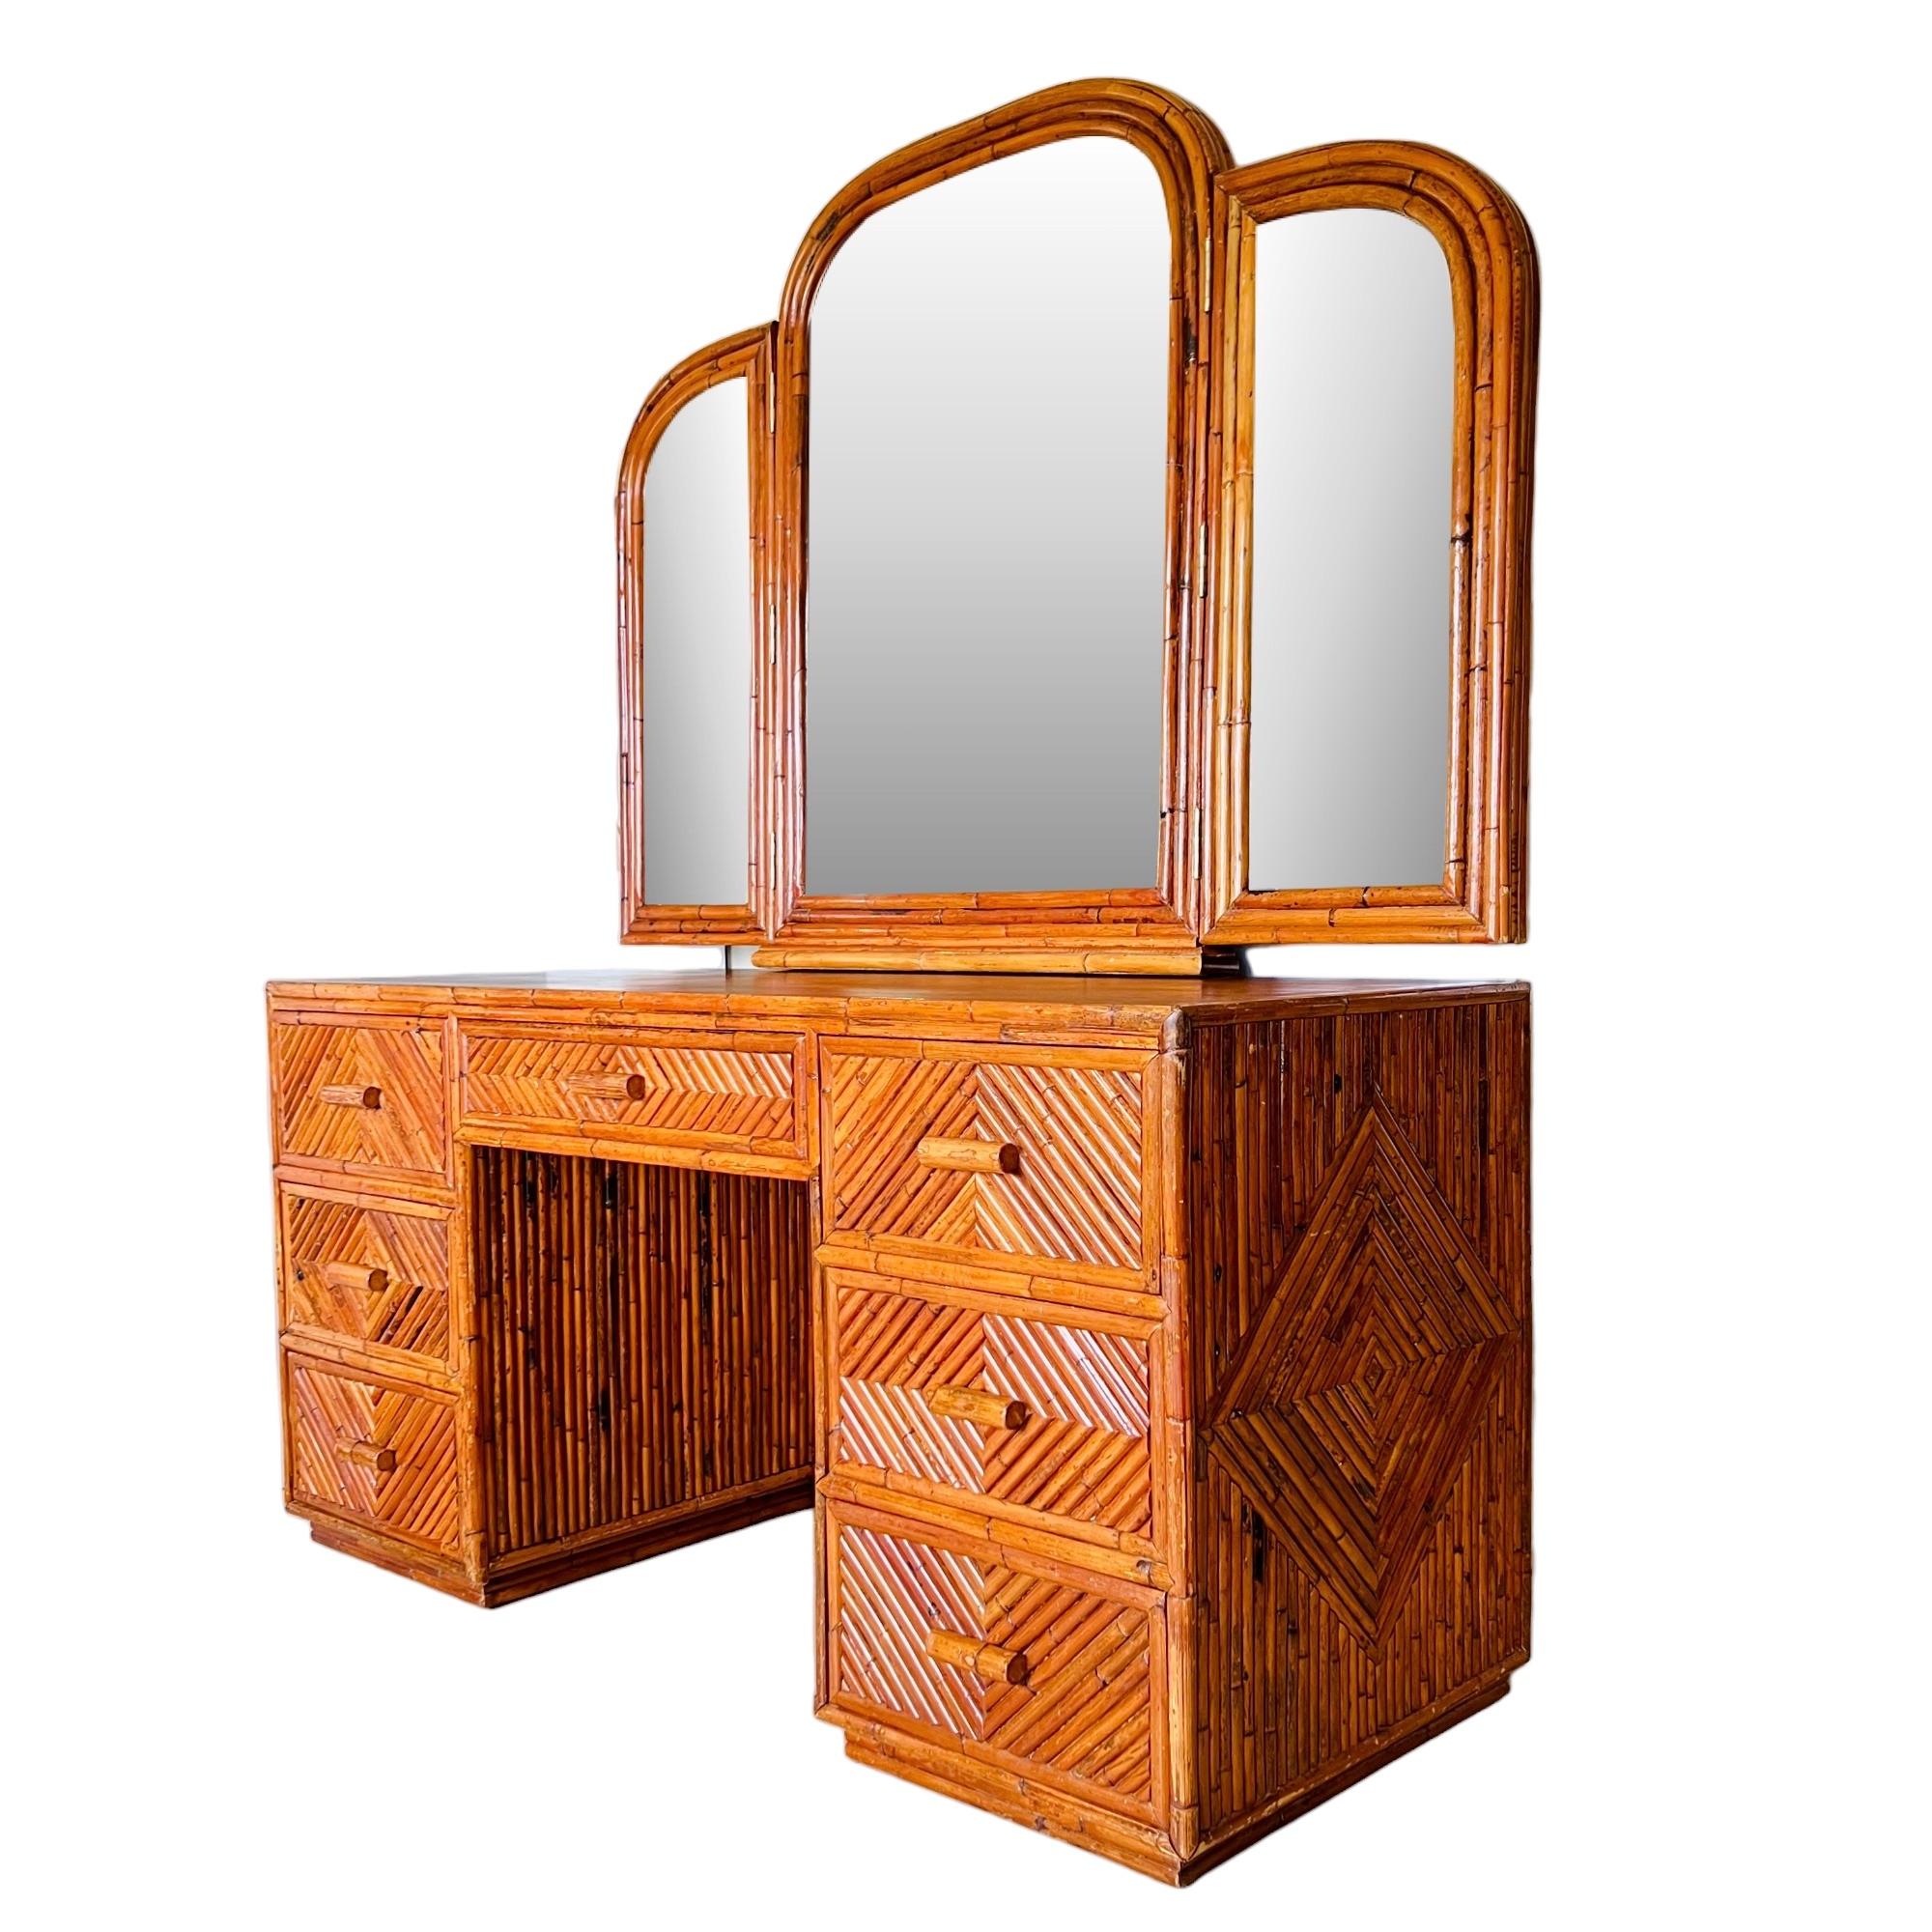 A vintage Palm Beach Regency split reed rattan dressing table or desk with mirror. This large vanity features seven spacious drawers, a solid teak wood top surface, diamond pattern detail extending through the drawer faces and on the side panels,